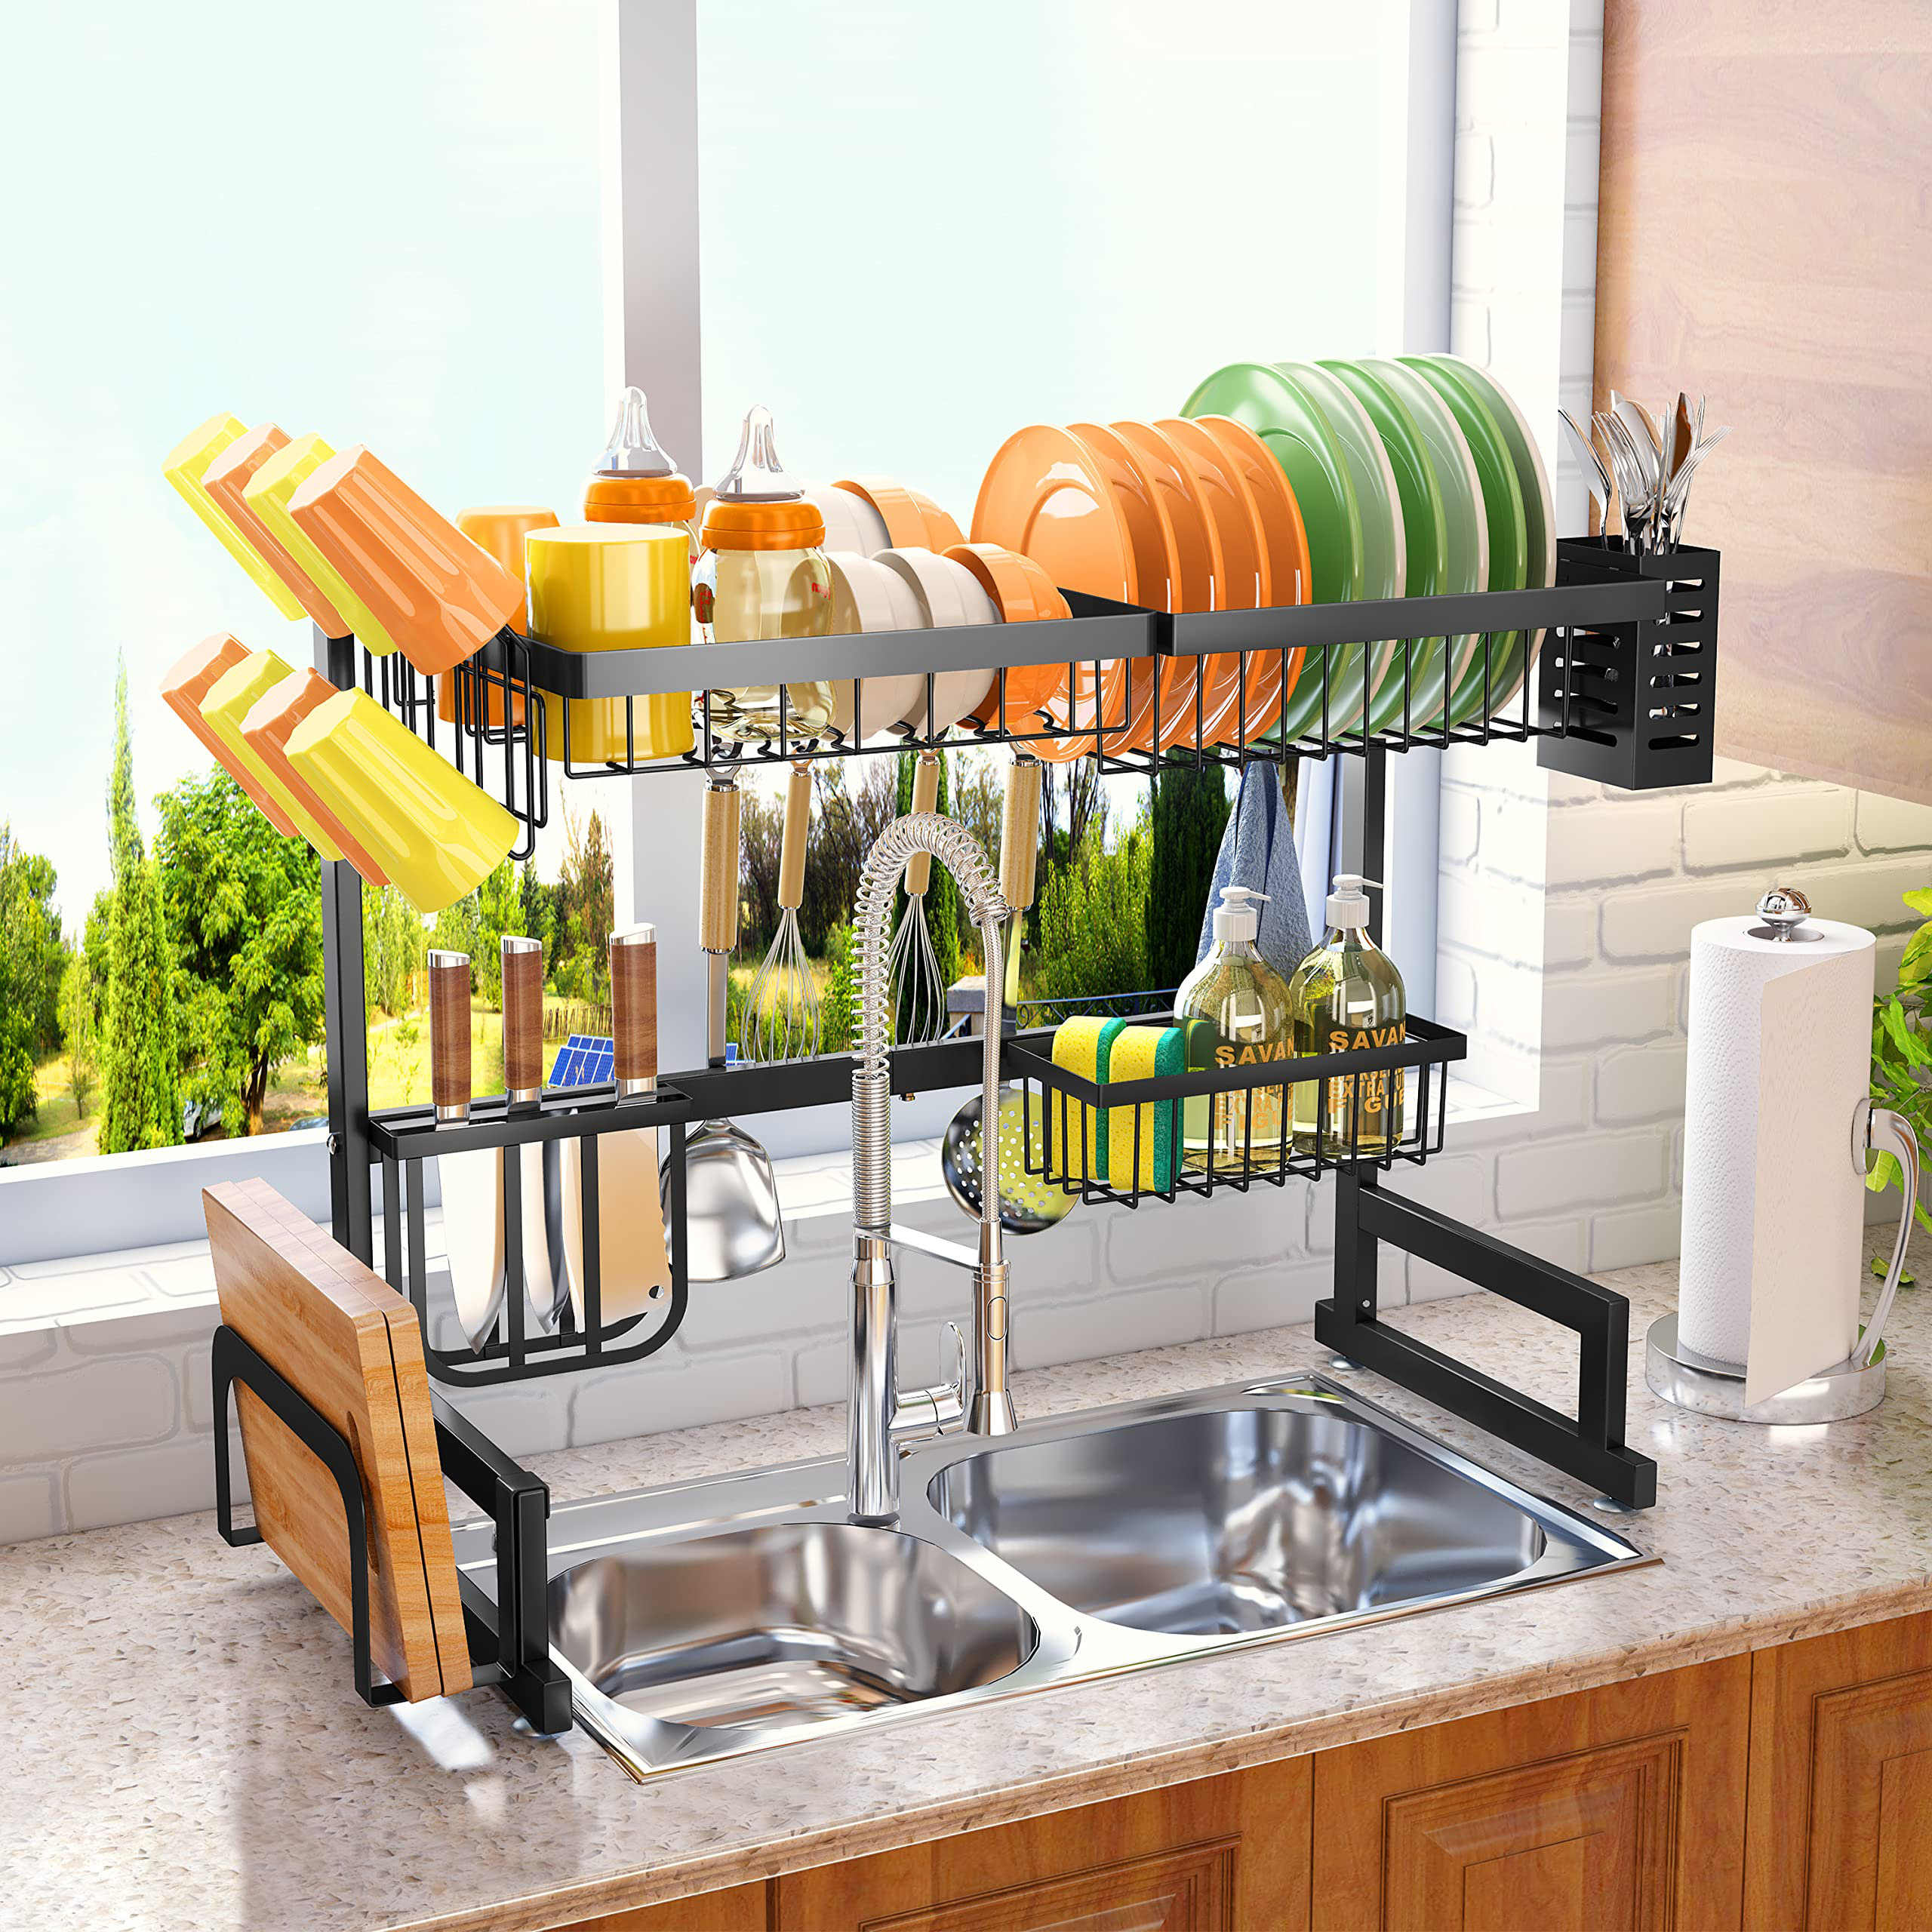 Captive Gala Stainless Steel Retractable over the Sink Dish Rack